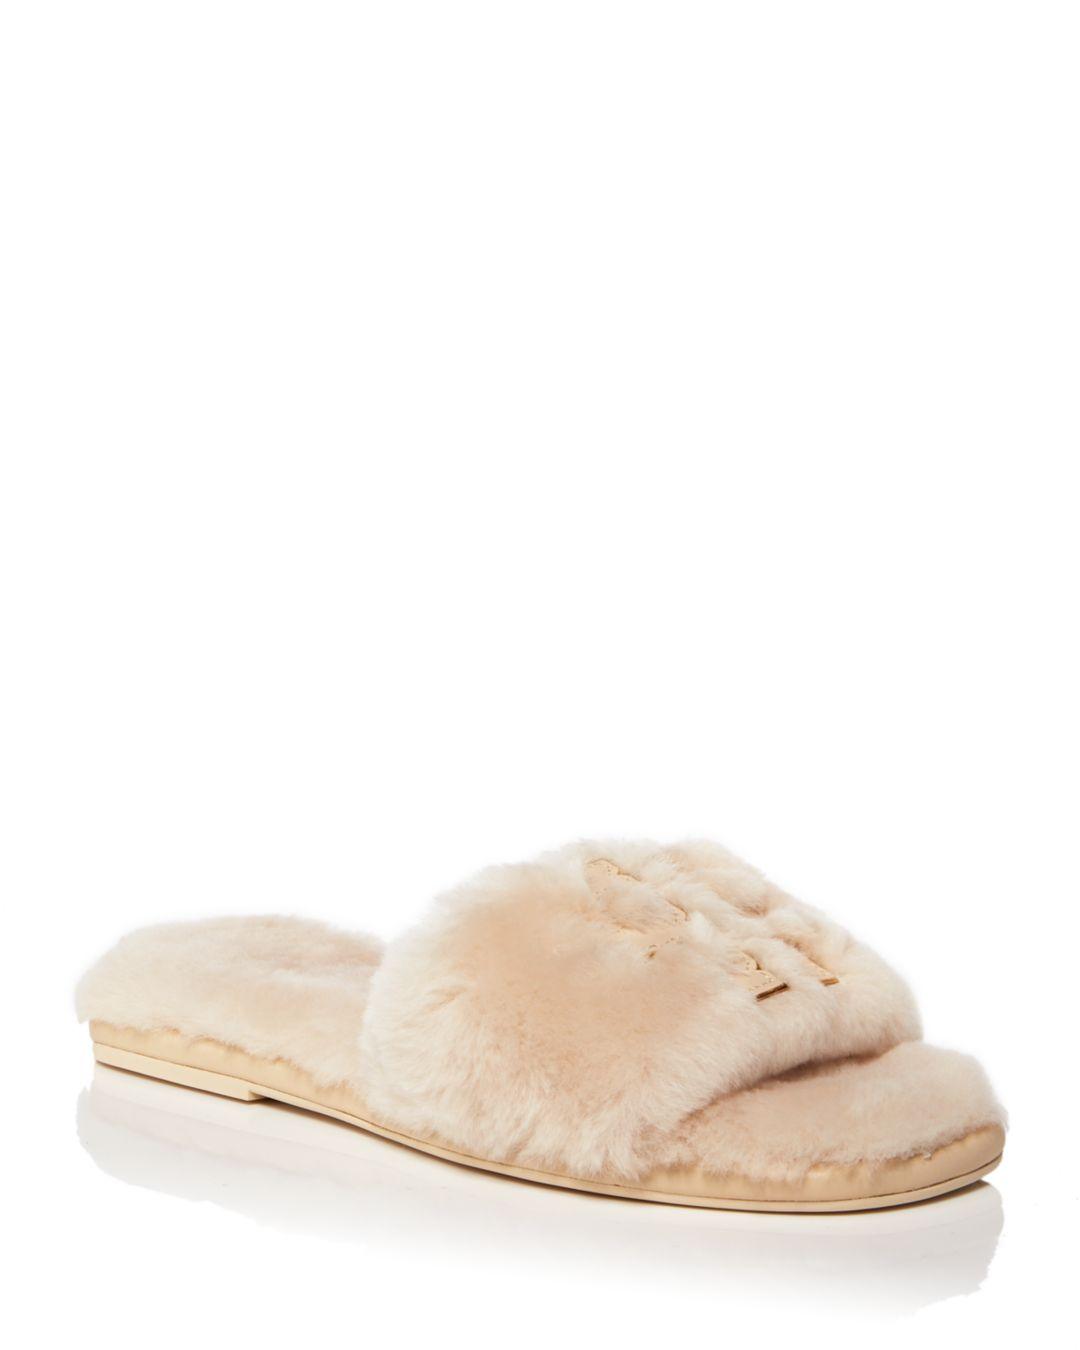 Tory Burch Double T Fluffy Slippers in Natural | Lyst